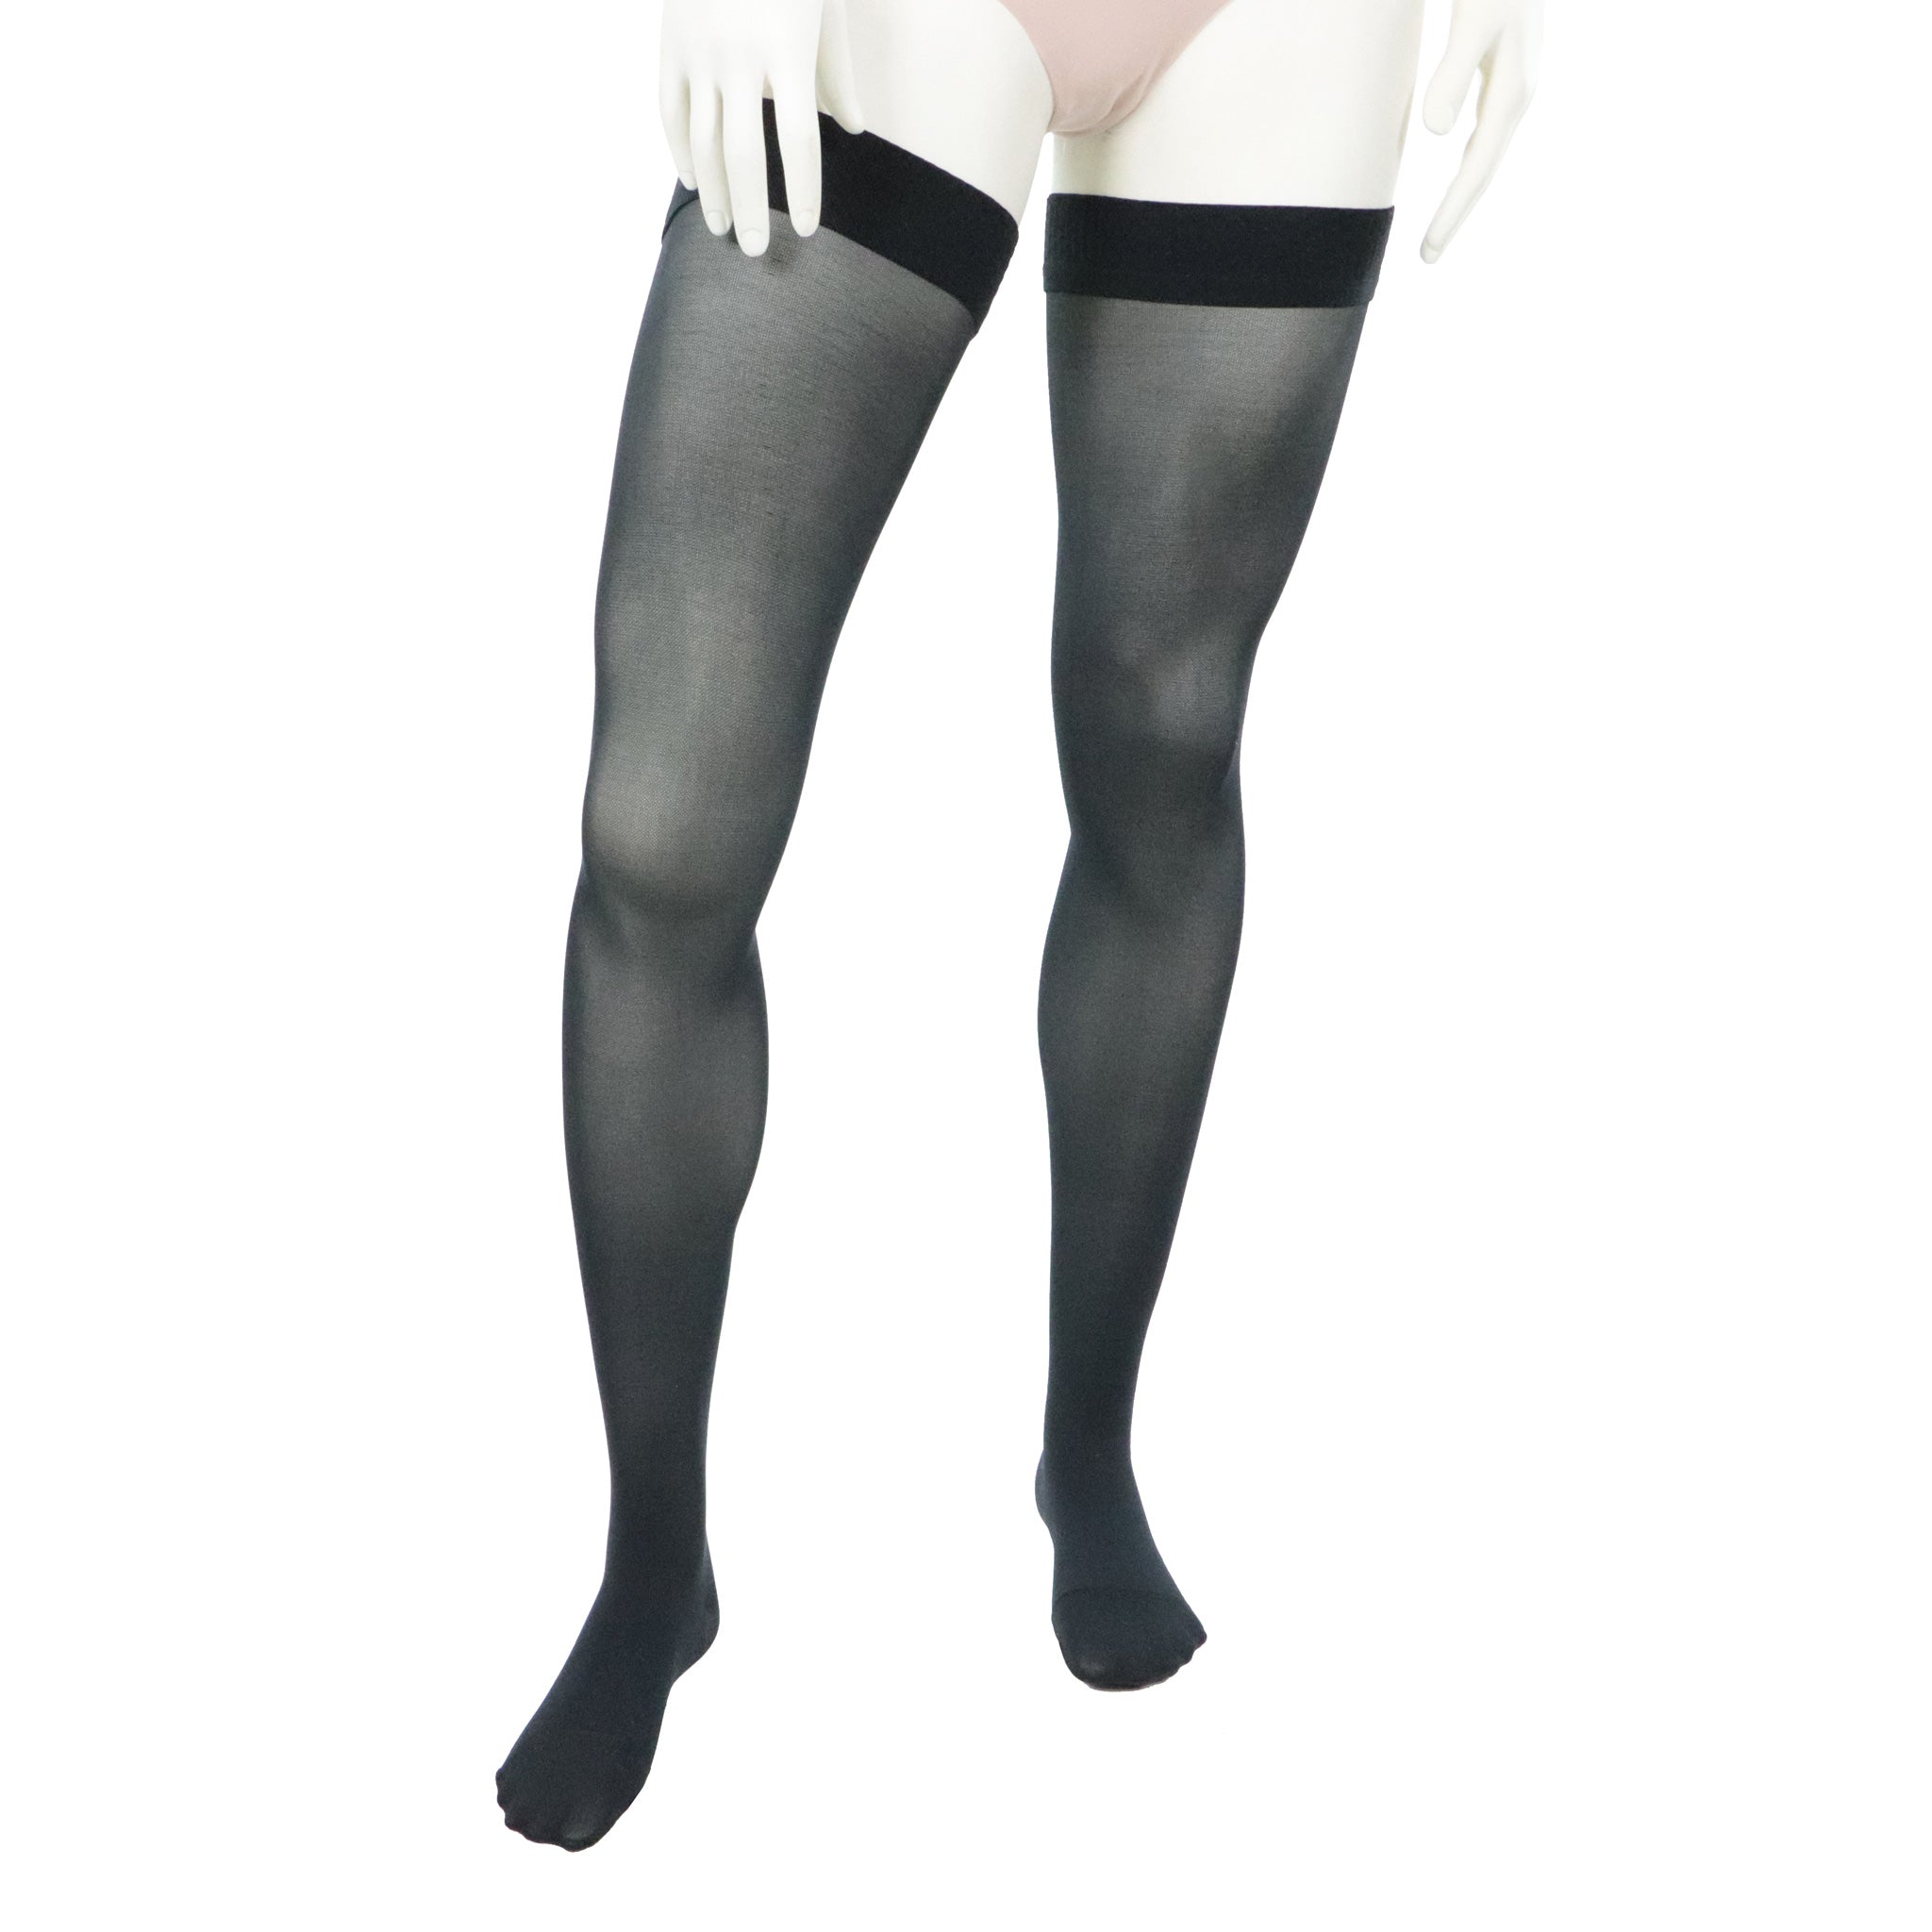 30-40 mmHg compression stockings for women thigh high Doctor Brace black front view